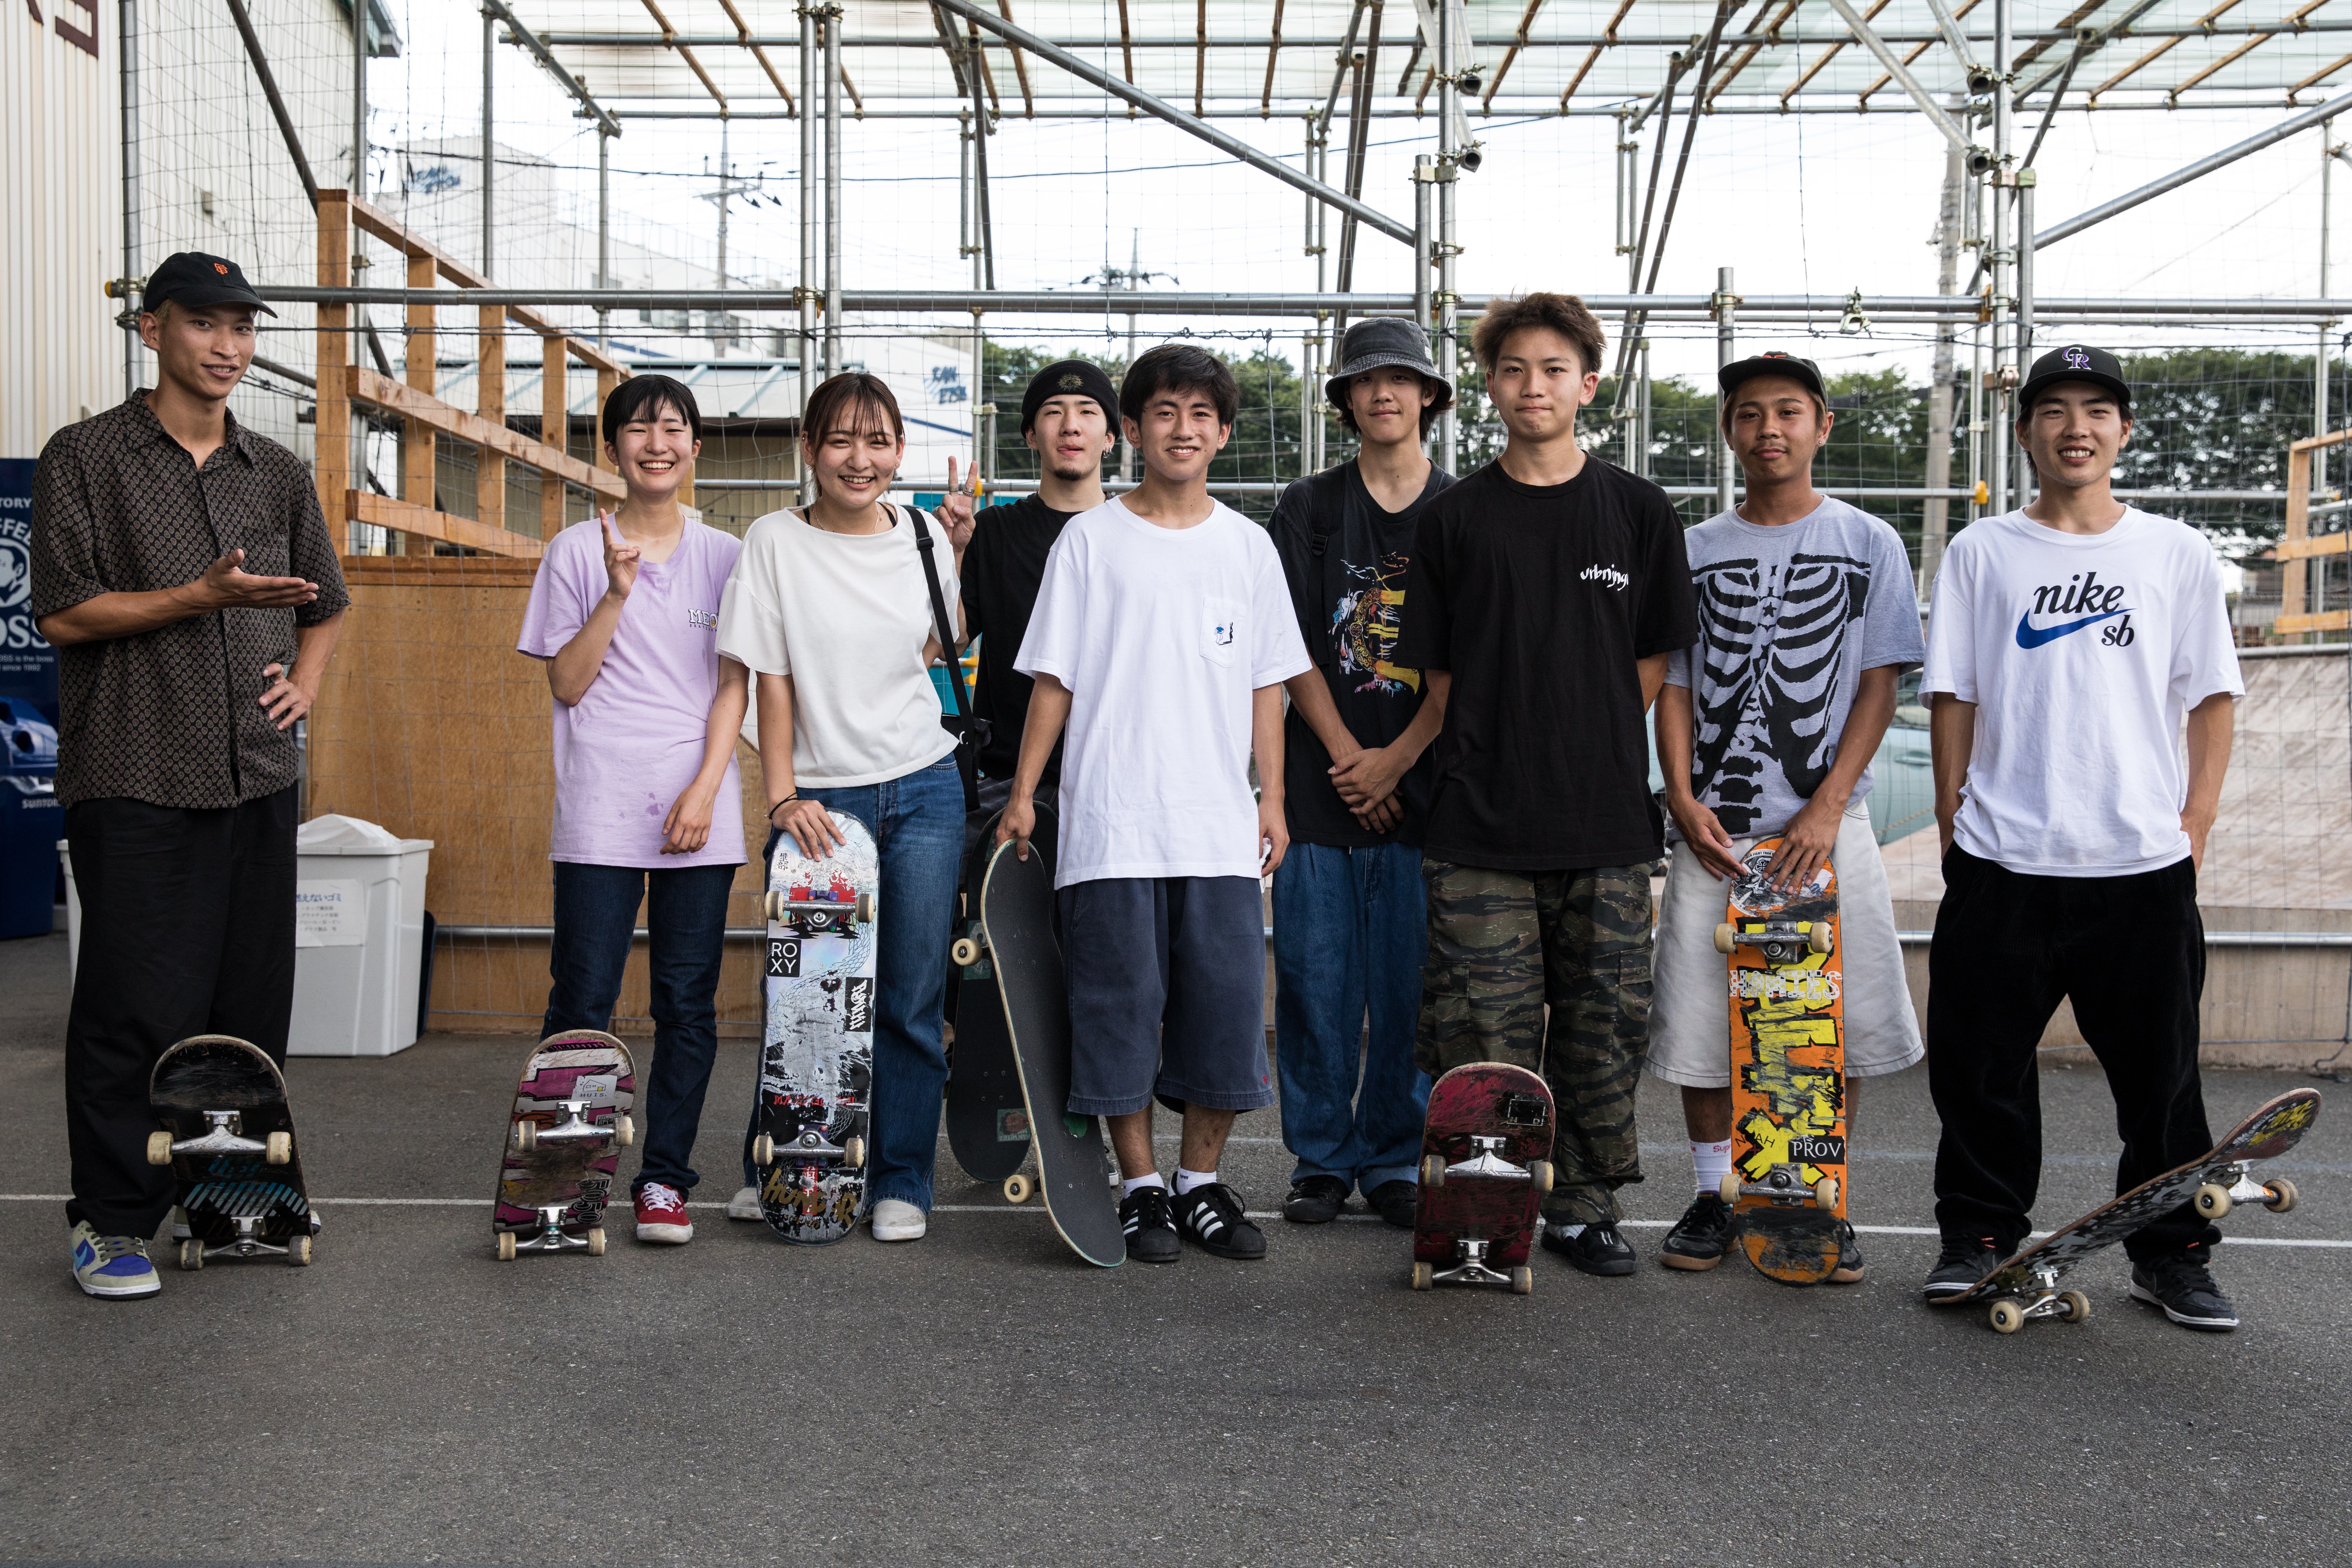 Inside Japans Only Skateboarding High School, Where the Olympics Are Met with Shrugs